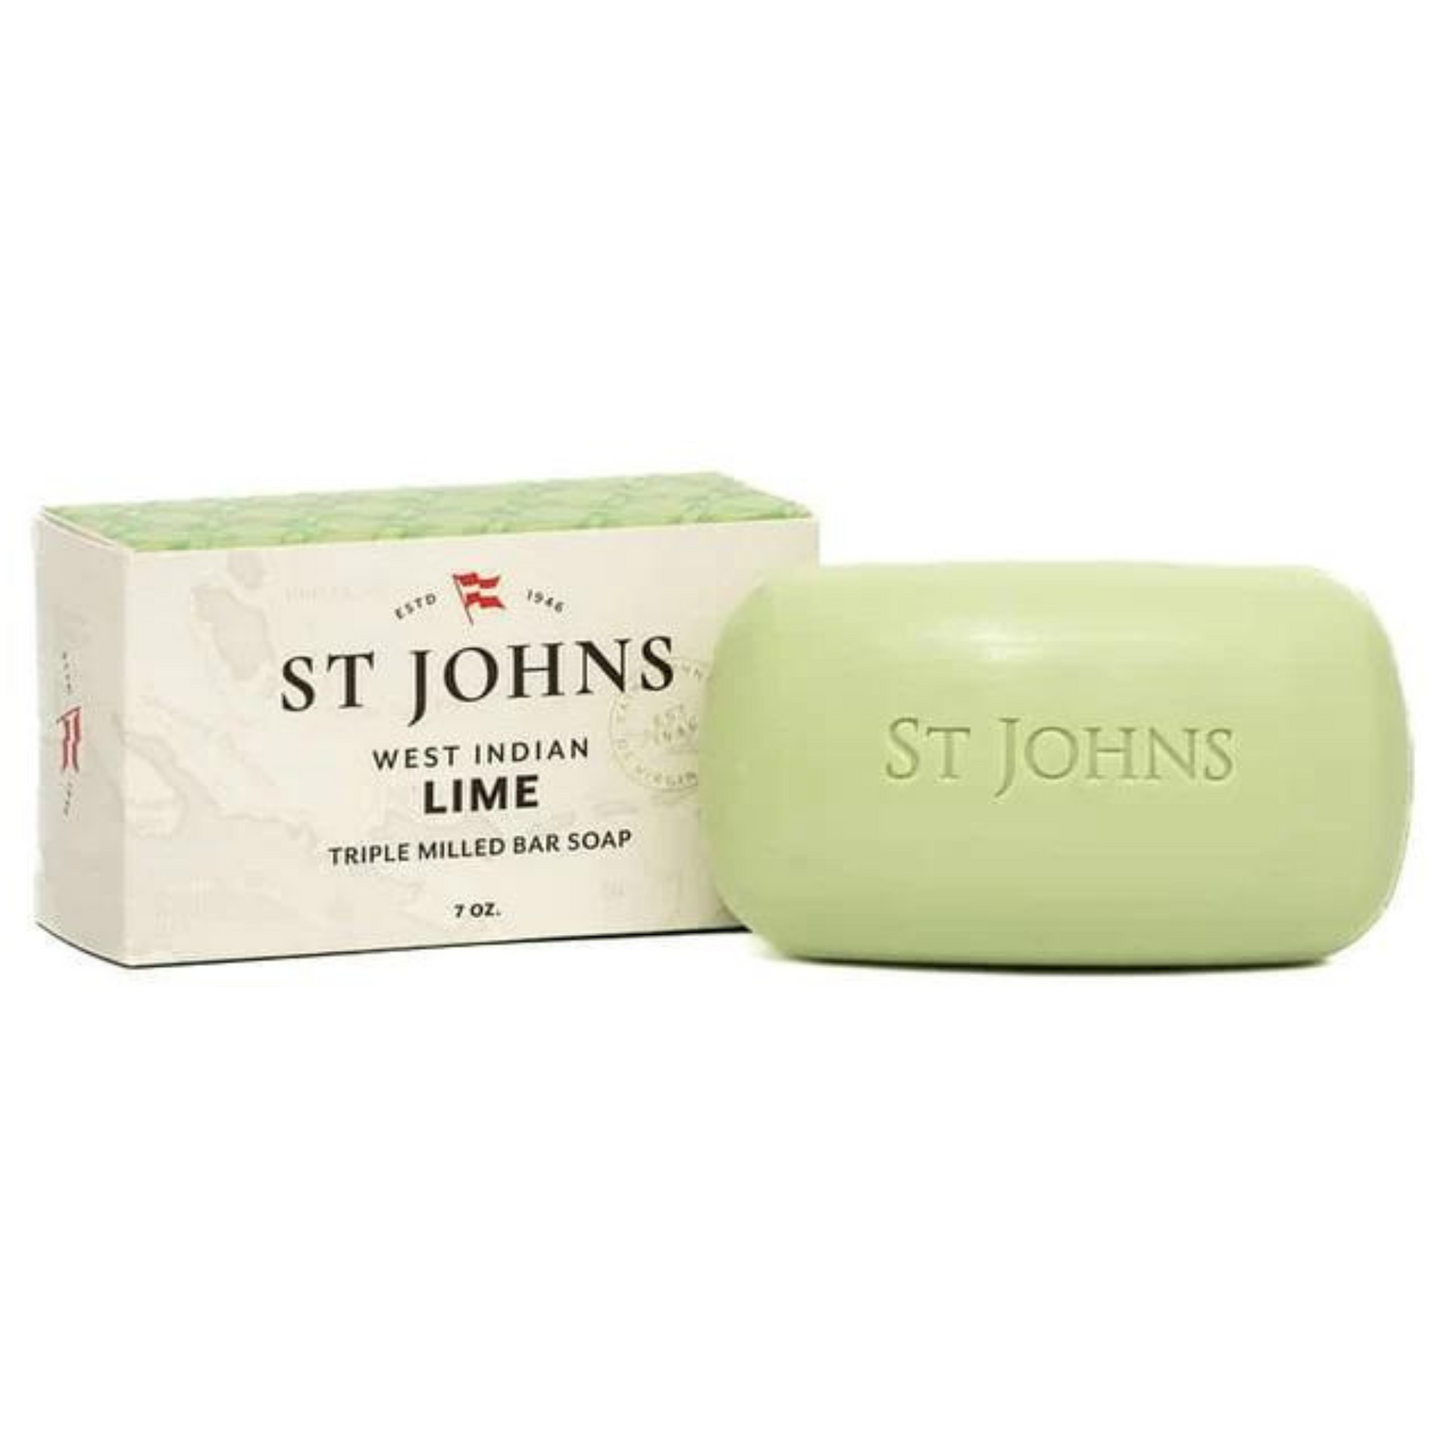 Primary Image of St. Johns West Indian Lime Bar Soap (7 oz)